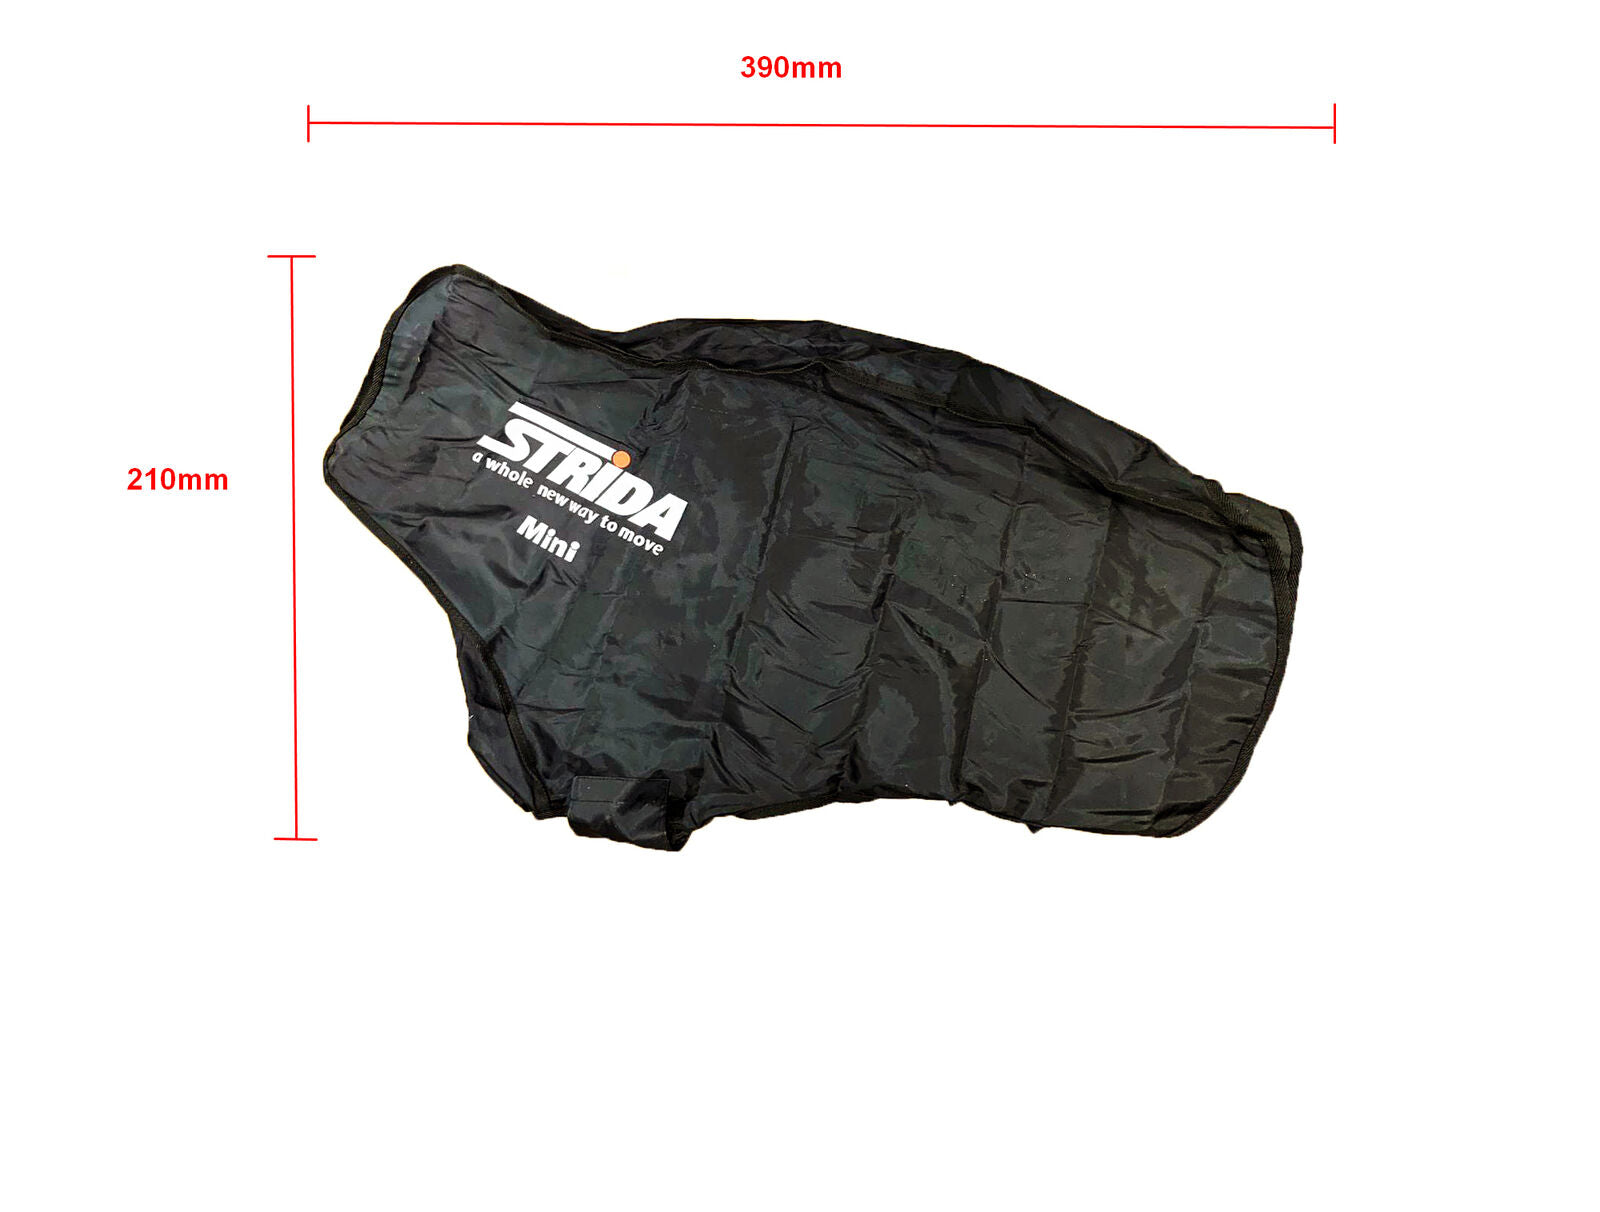 Strida TLH-002 Nylon Waterproof Bicycle Bike Cover for 16/18 inch Folding use